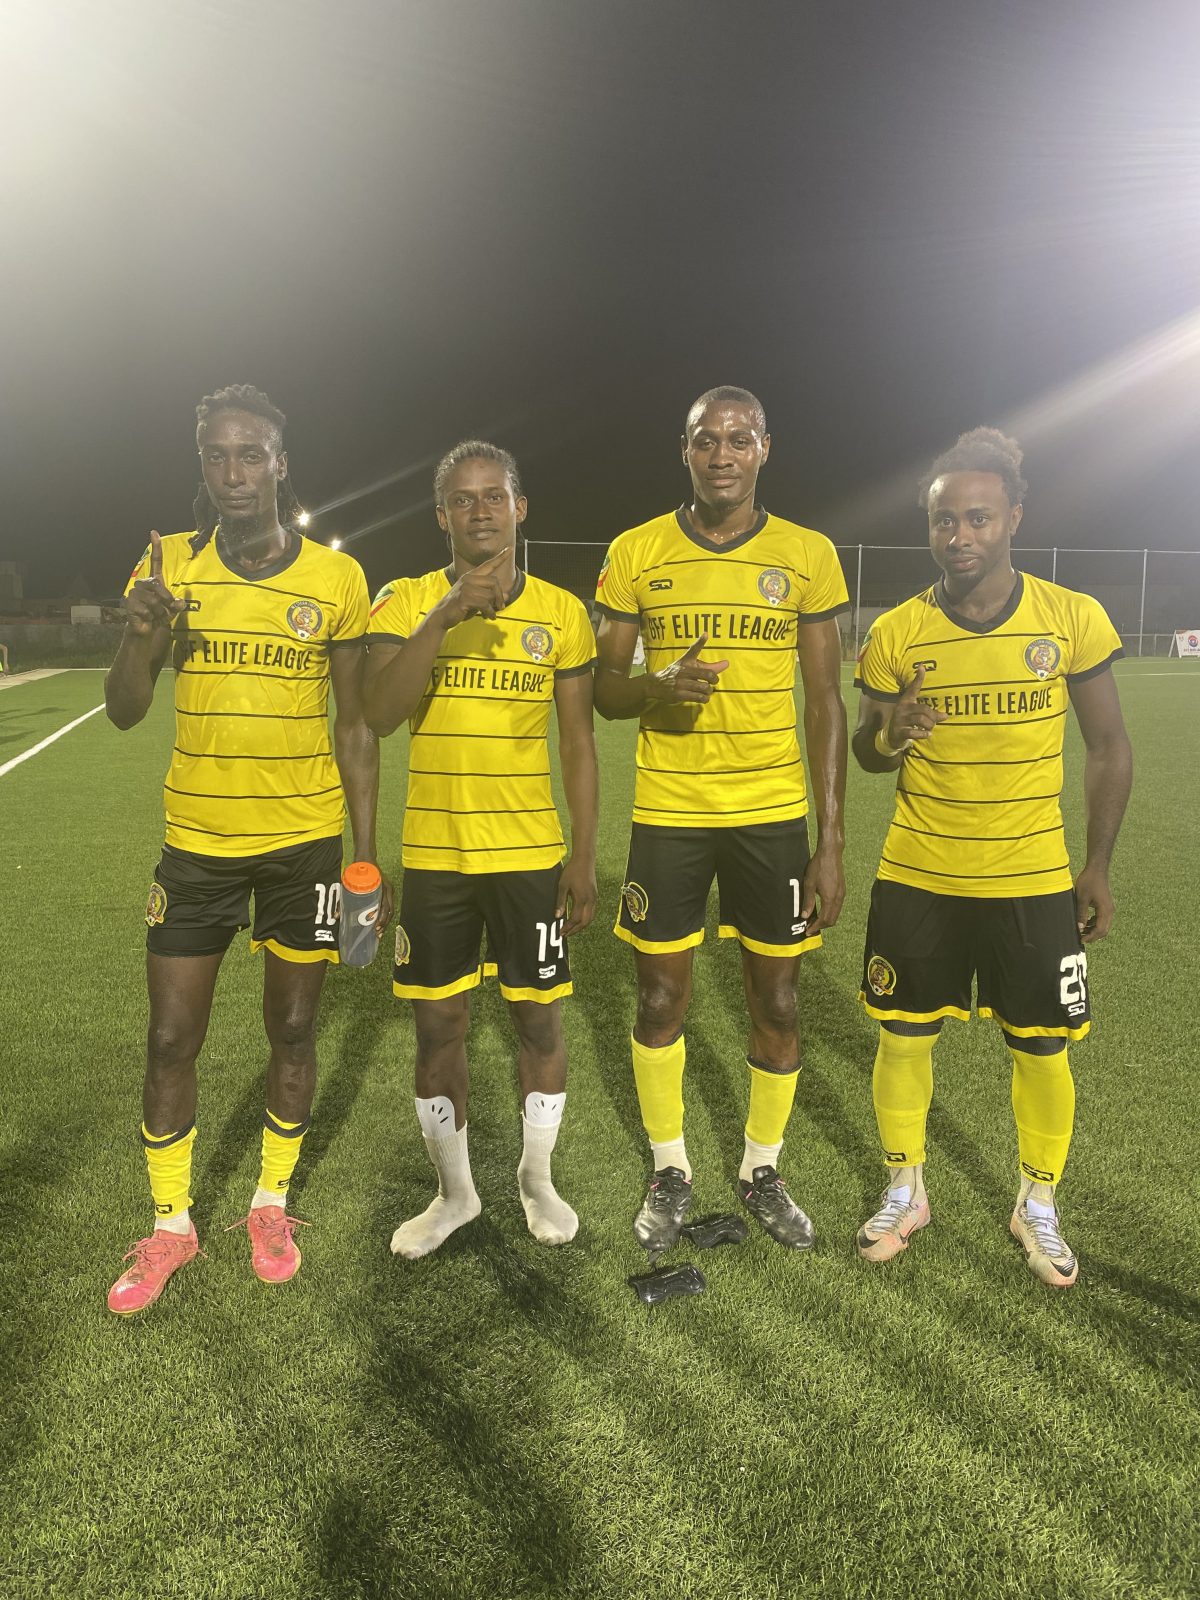 GPF scorers from left: Andrew Murray, Randolph Wagner, Jermaine Beckles, and Trayon Bobb